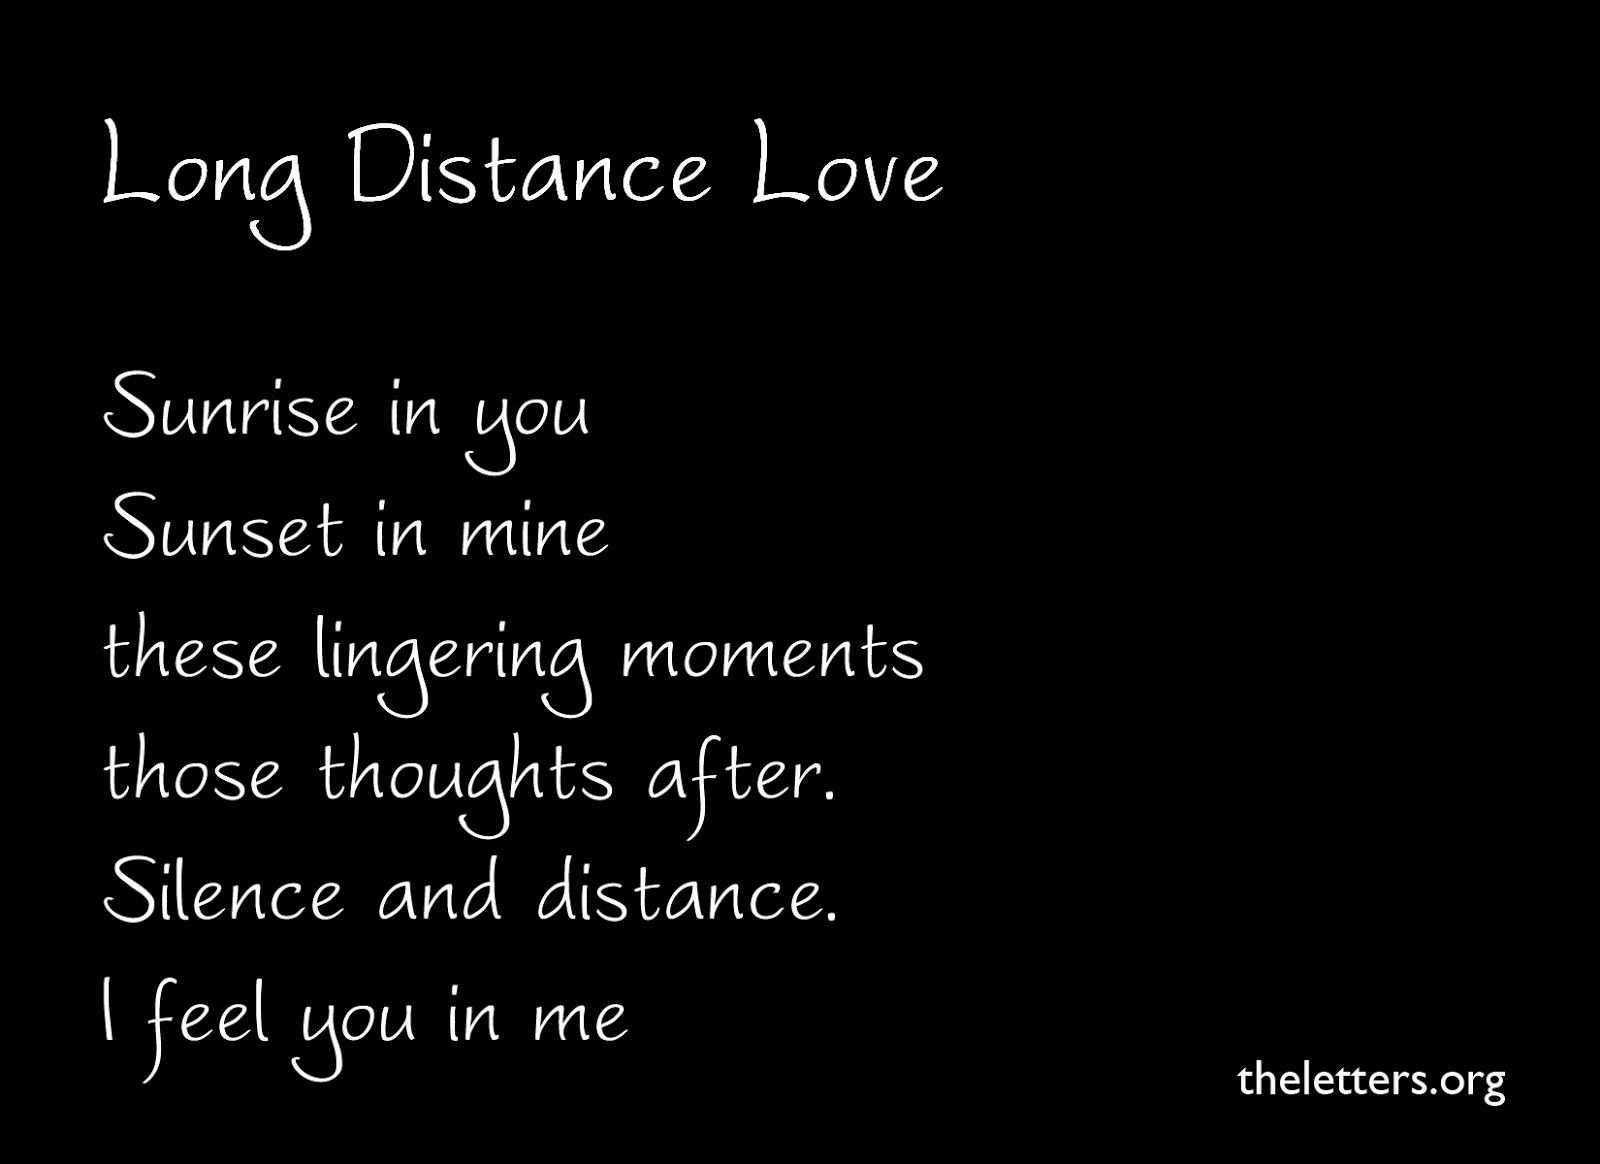 cute-quotes-long-distance-relationships-1731.jpg